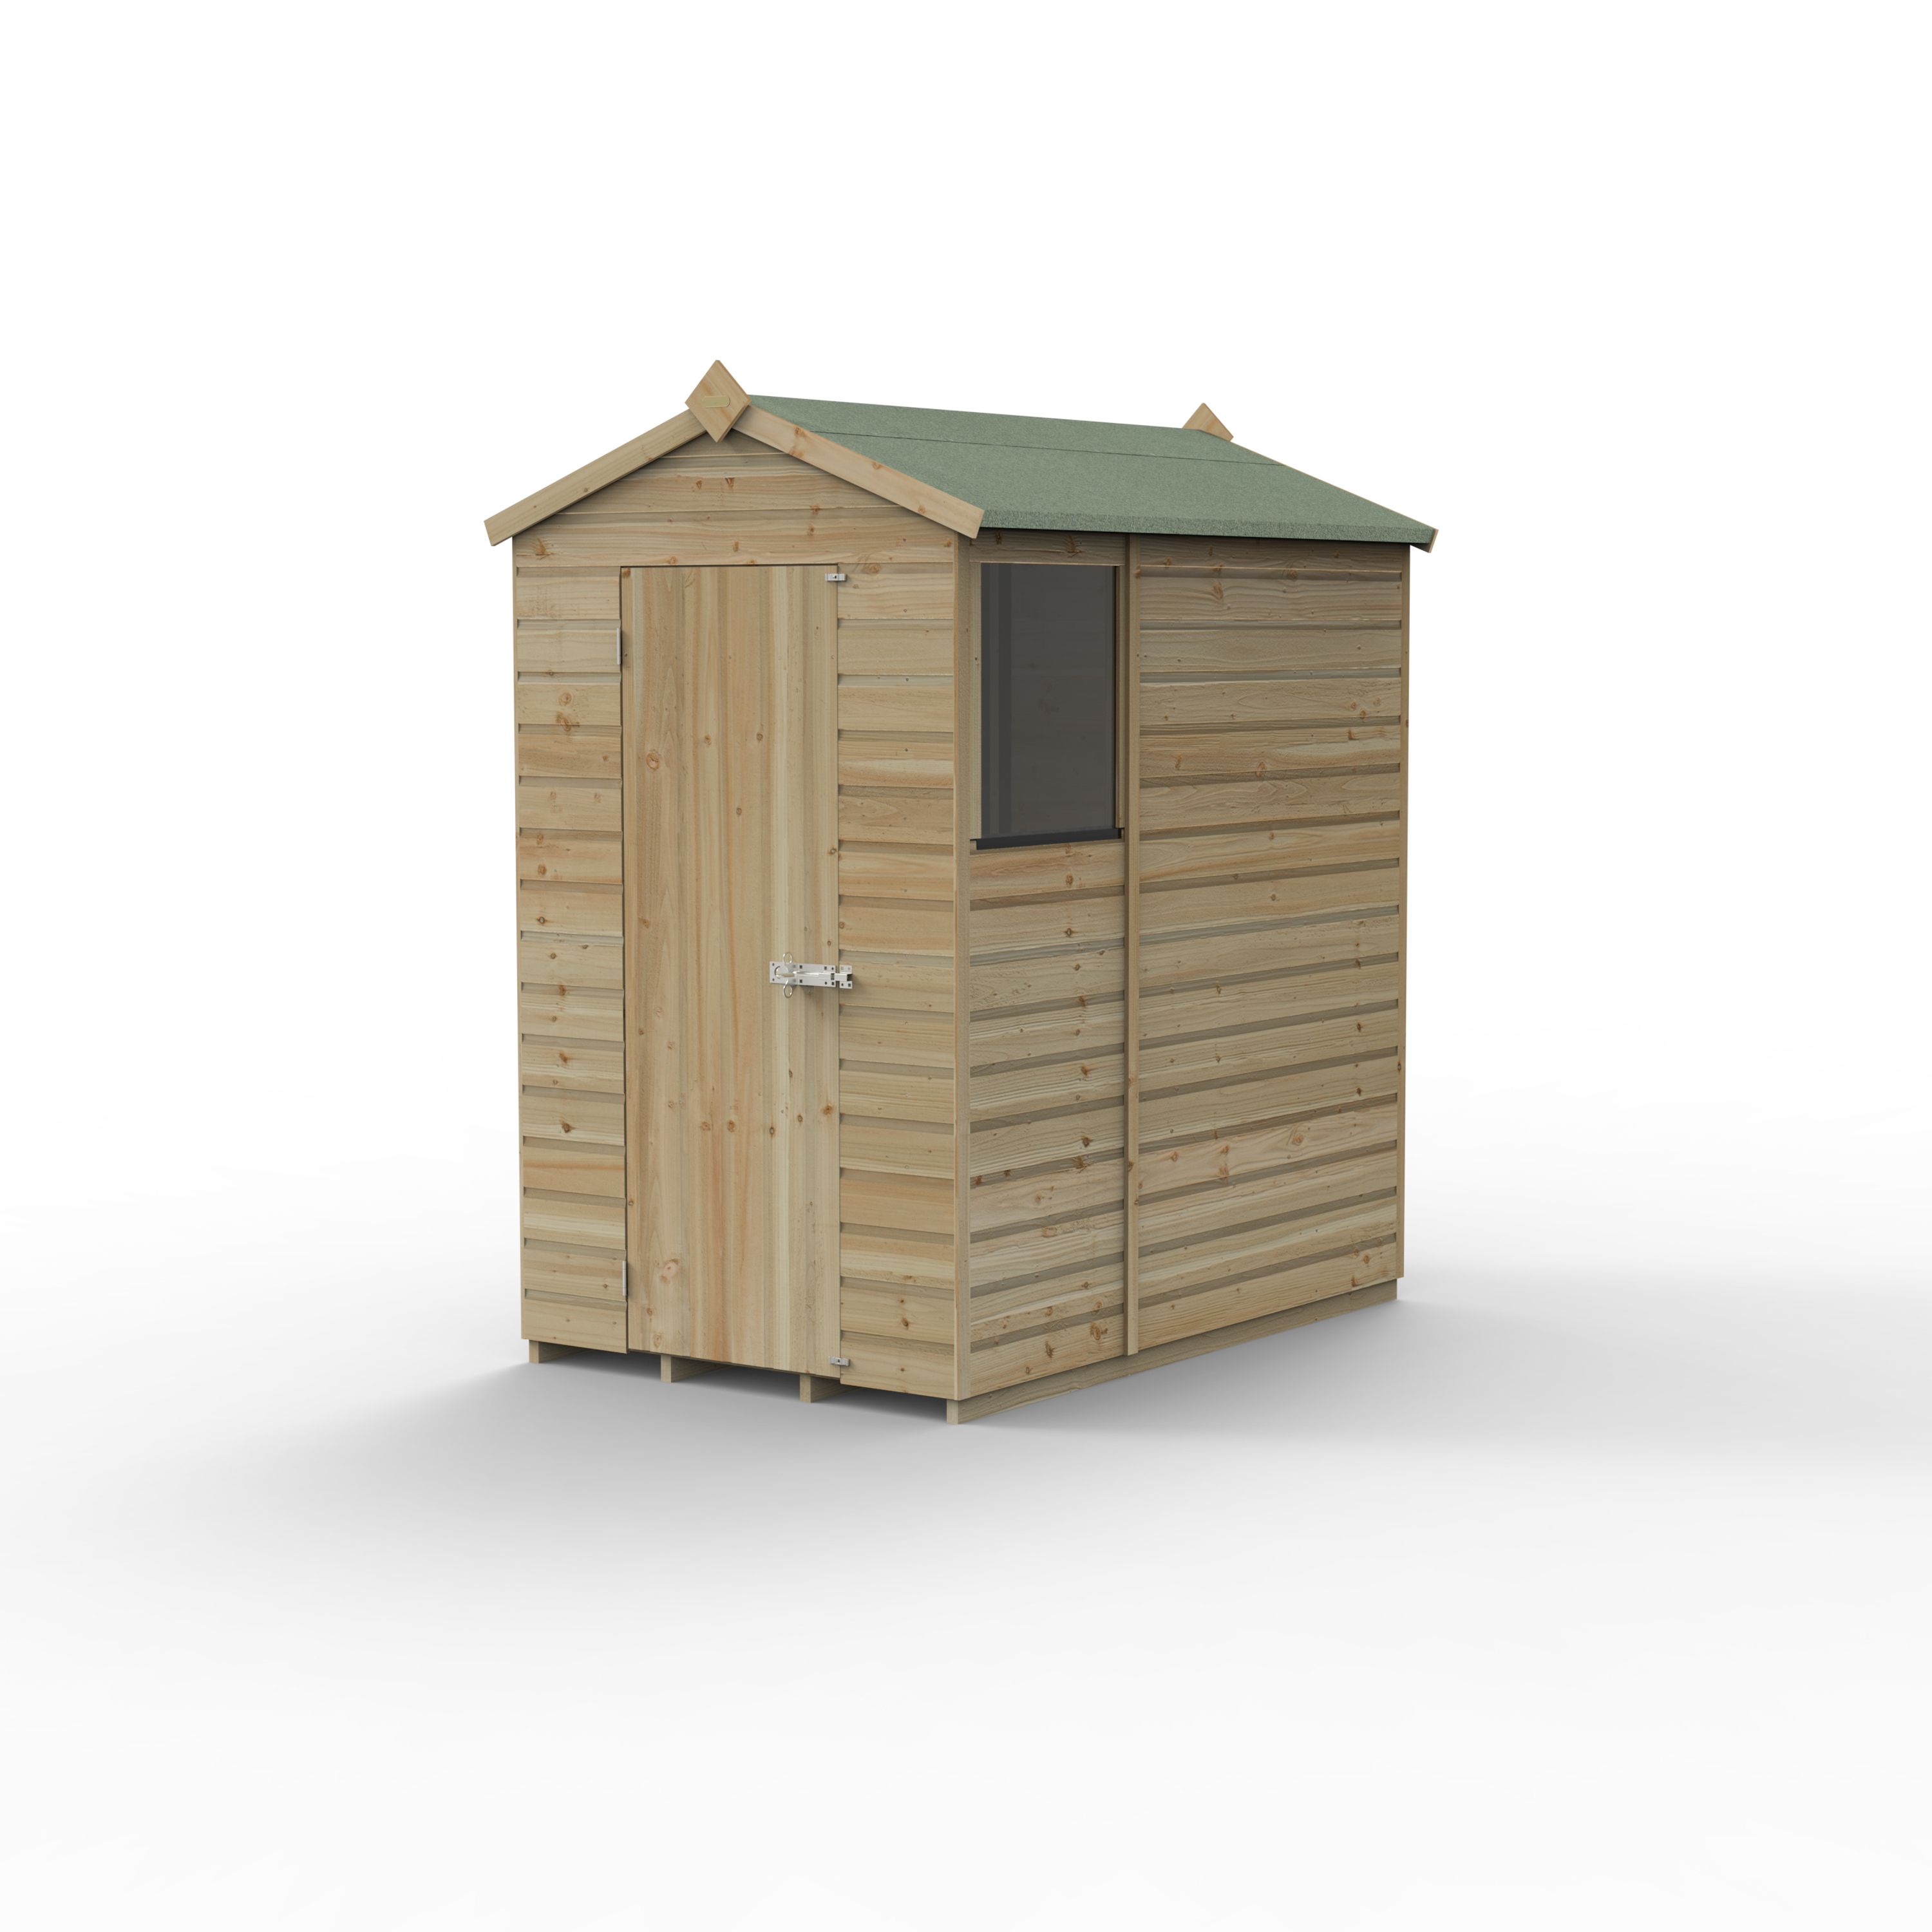 Forest Garden Beckwood 6x4 ft Apex Natural timber Wooden Shed with floor & 1 window